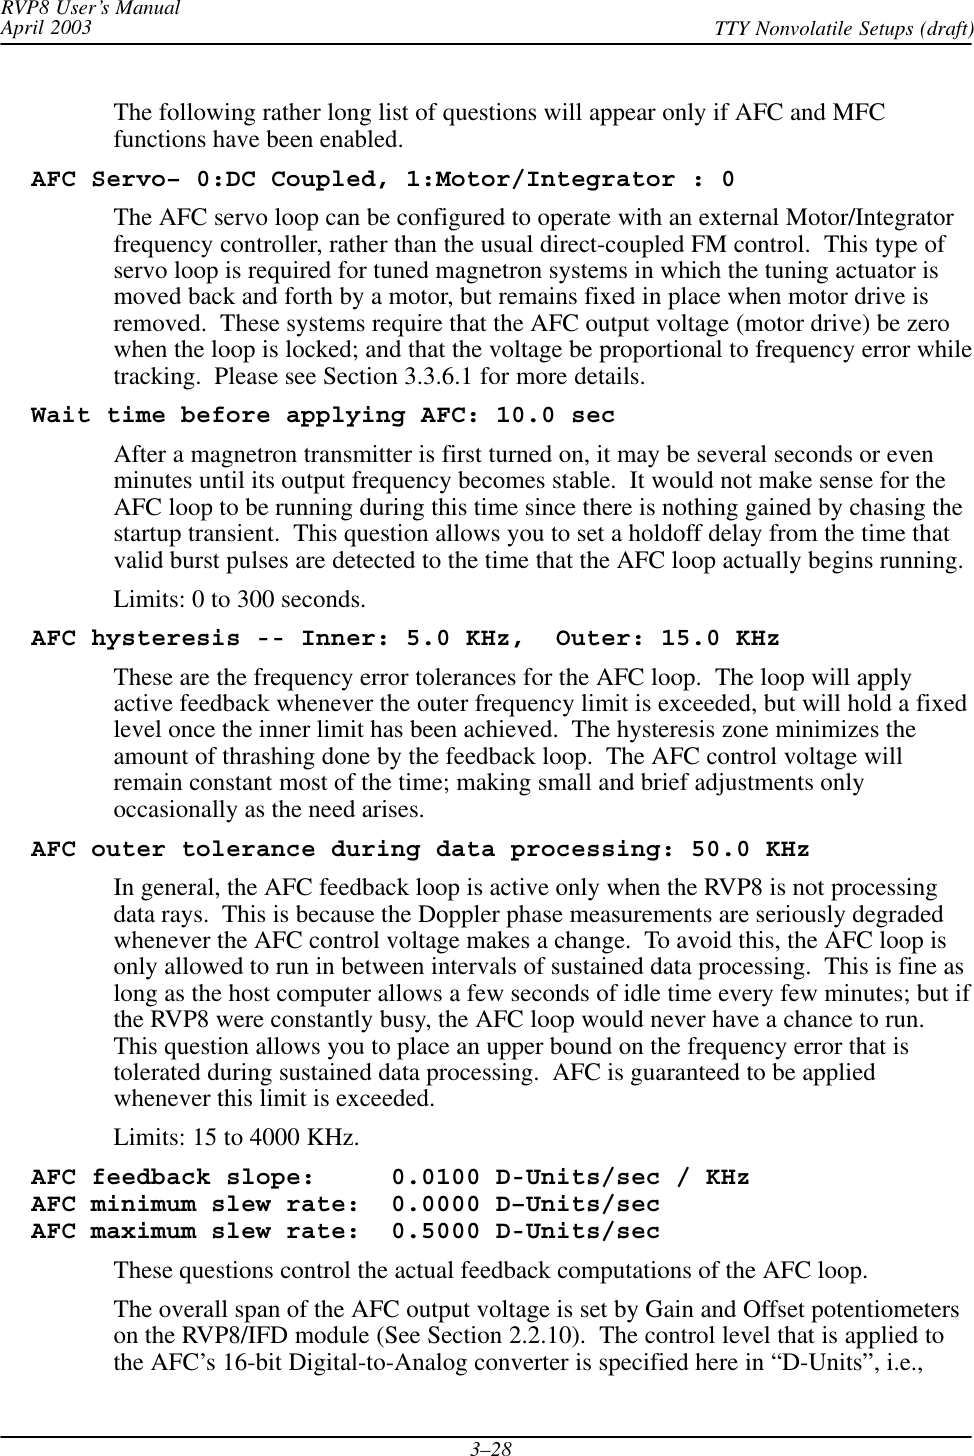 RVP8 User’s ManualApril 2003 TTY Nonvolatile Setups (draft)3–28The following rather long list of questions will appear only if AFC and MFCfunctions have been enabled.  AFC Servo– 0:DC Coupled, 1:Motor/Integrator : 0The AFC servo loop can be configured to operate with an external Motor/Integratorfrequency controller, rather than the usual direct-coupled FM control.  This type ofservo loop is required for tuned magnetron systems in which the tuning actuator ismoved back and forth by a motor, but remains fixed in place when motor drive isremoved.  These systems require that the AFC output voltage (motor drive) be zerowhen the loop is locked; and that the voltage be proportional to frequency error whiletracking.  Please see Section 3.3.6.1 for more details.  Wait time before applying AFC: 10.0 secAfter a magnetron transmitter is first turned on, it may be several seconds or evenminutes until its output frequency becomes stable.  It would not make sense for theAFC loop to be running during this time since there is nothing gained by chasing thestartup transient.  This question allows you to set a holdoff delay from the time thatvalid burst pulses are detected to the time that the AFC loop actually begins running.Limits: 0 to 300 seconds.  AFC hysteresis -- Inner: 5.0 KHz,  Outer: 15.0 KHzThese are the frequency error tolerances for the AFC loop.  The loop will applyactive feedback whenever the outer frequency limit is exceeded, but will hold a fixedlevel once the inner limit has been achieved.  The hysteresis zone minimizes theamount of thrashing done by the feedback loop.  The AFC control voltage willremain constant most of the time; making small and brief adjustments onlyoccasionally as the need arises.  AFC outer tolerance during data processing: 50.0 KHzIn general, the AFC feedback loop is active only when the RVP8 is not processingdata rays.  This is because the Doppler phase measurements are seriously degradedwhenever the AFC control voltage makes a change.  To avoid this, the AFC loop isonly allowed to run in between intervals of sustained data processing.  This is fine aslong as the host computer allows a few seconds of idle time every few minutes; but ifthe RVP8 were constantly busy, the AFC loop would never have a chance to run.This question allows you to place an upper bound on the frequency error that istolerated during sustained data processing.  AFC is guaranteed to be appliedwhenever this limit is exceeded.Limits: 15 to 4000 KHz.  AFC feedback slope:     0.0100 D-Units/sec / KHz  AFC minimum slew rate:  0.0000 D–Units/sec  AFC maximum slew rate:  0.5000 D-Units/secThese questions control the actual feedback computations of the AFC loop.The overall span of the AFC output voltage is set by Gain and Offset potentiometerson the RVP8/IFD module (See Section 2.2.10).  The control level that is applied tothe AFC’s 16-bit Digital-to-Analog converter is specified here in “D-Units”, i.e.,